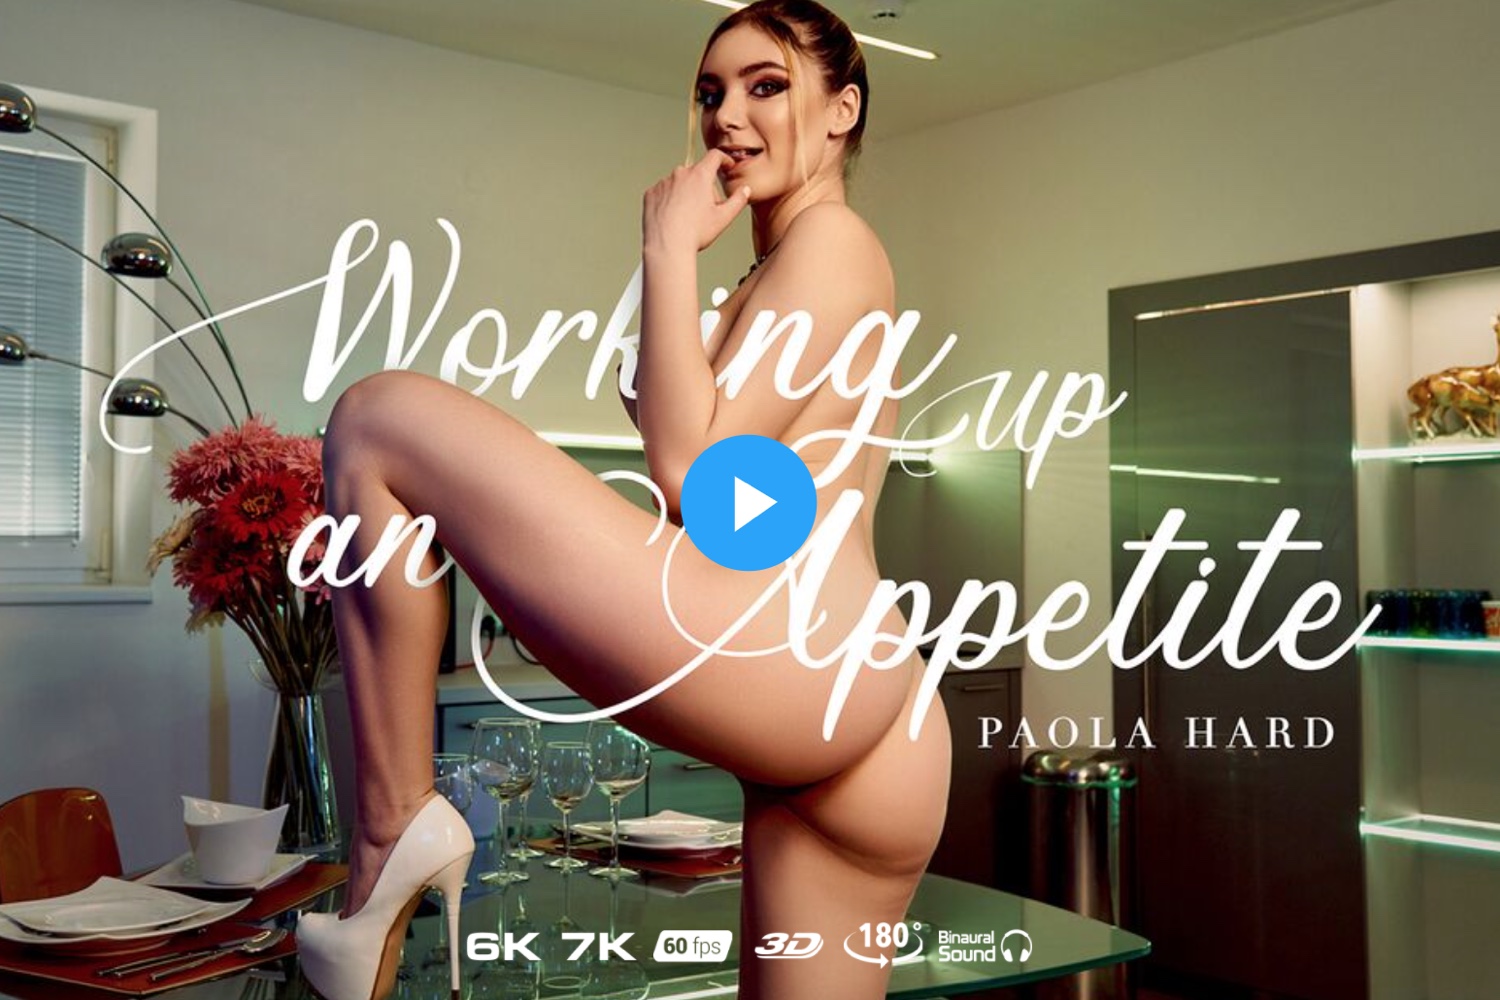 Working Up An Appetite - Paola Hard VR Porn - Paola Hard Virtual Reality Porn